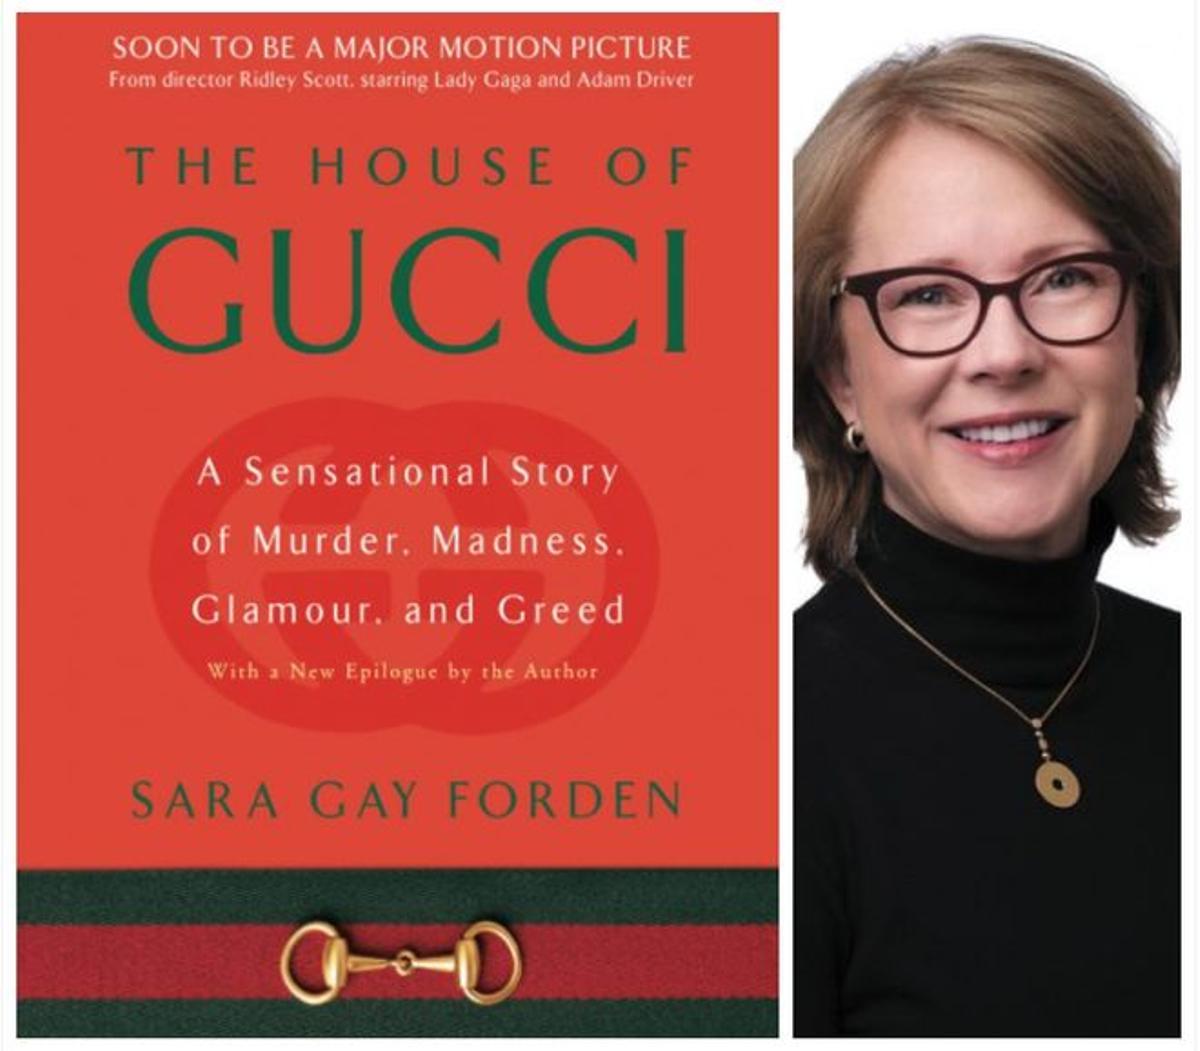 Portada del libro 'House of Gucci: A Sensational Story of Murder, Madness, Glamour, and Greed' y su autora, Sara Gay Forden.